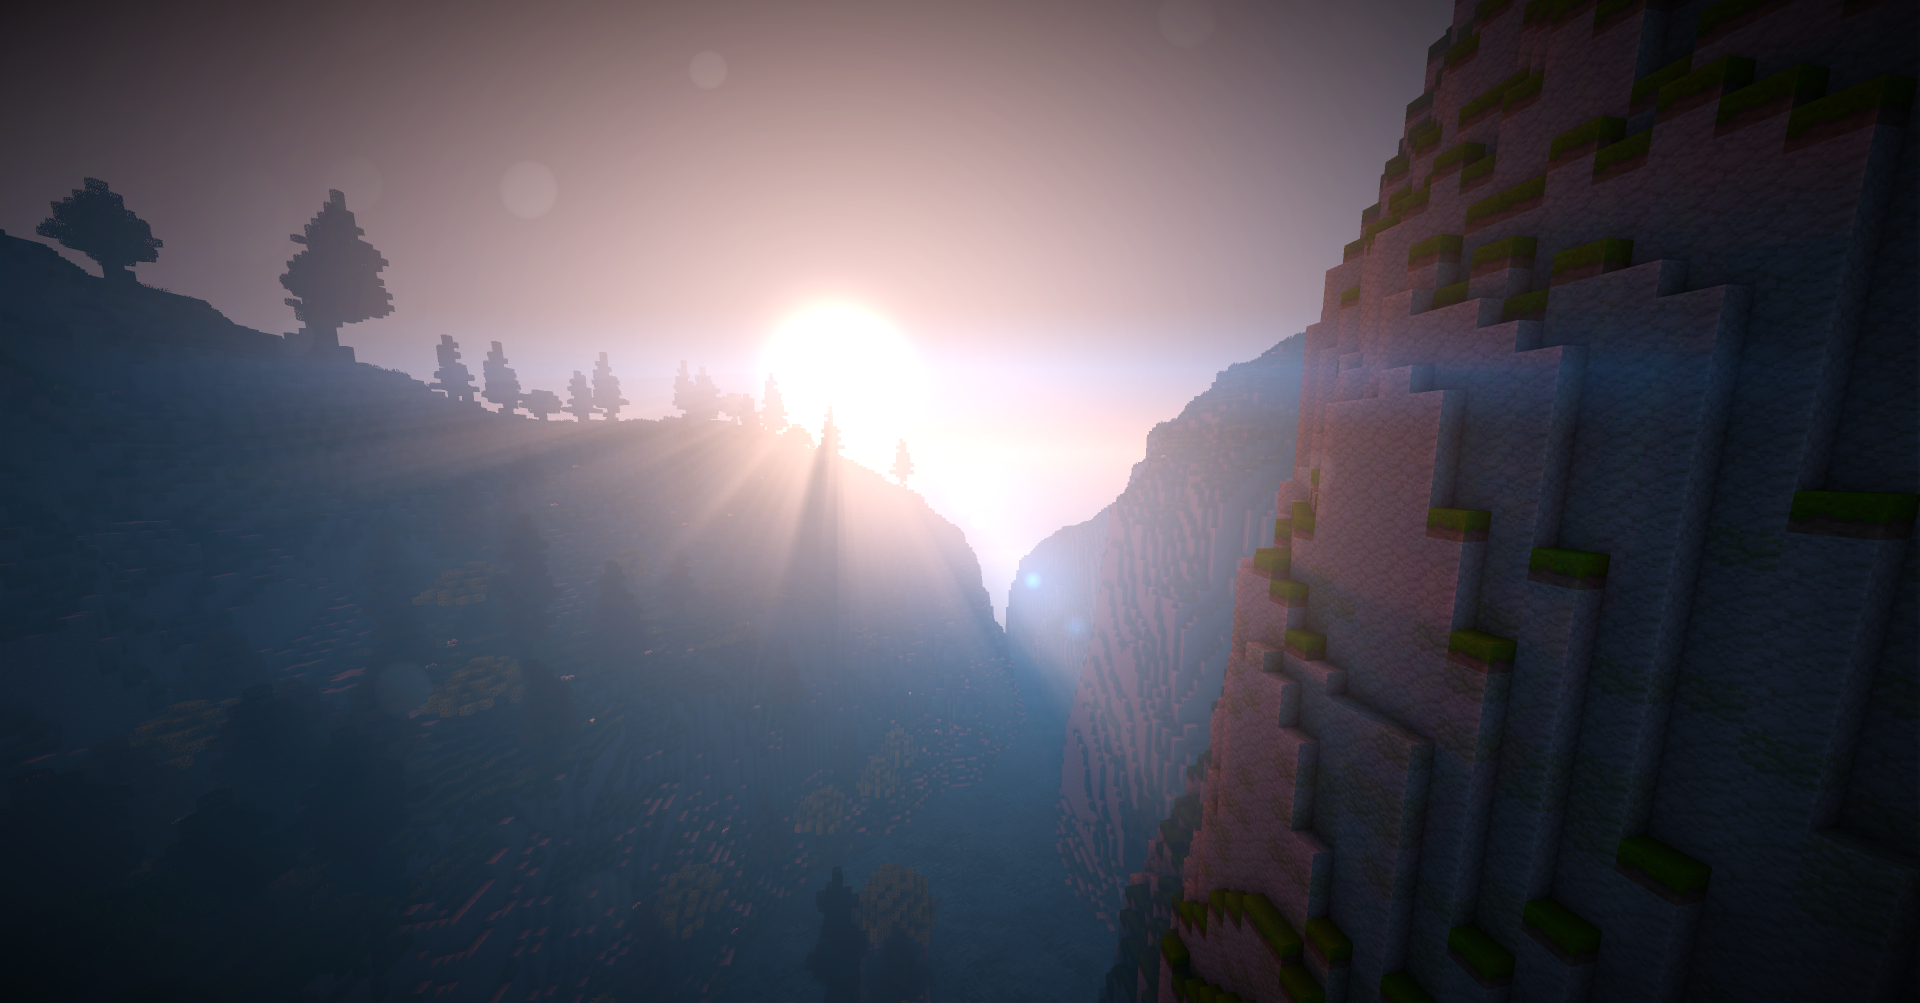 A truly beautiful sunset over a mountain